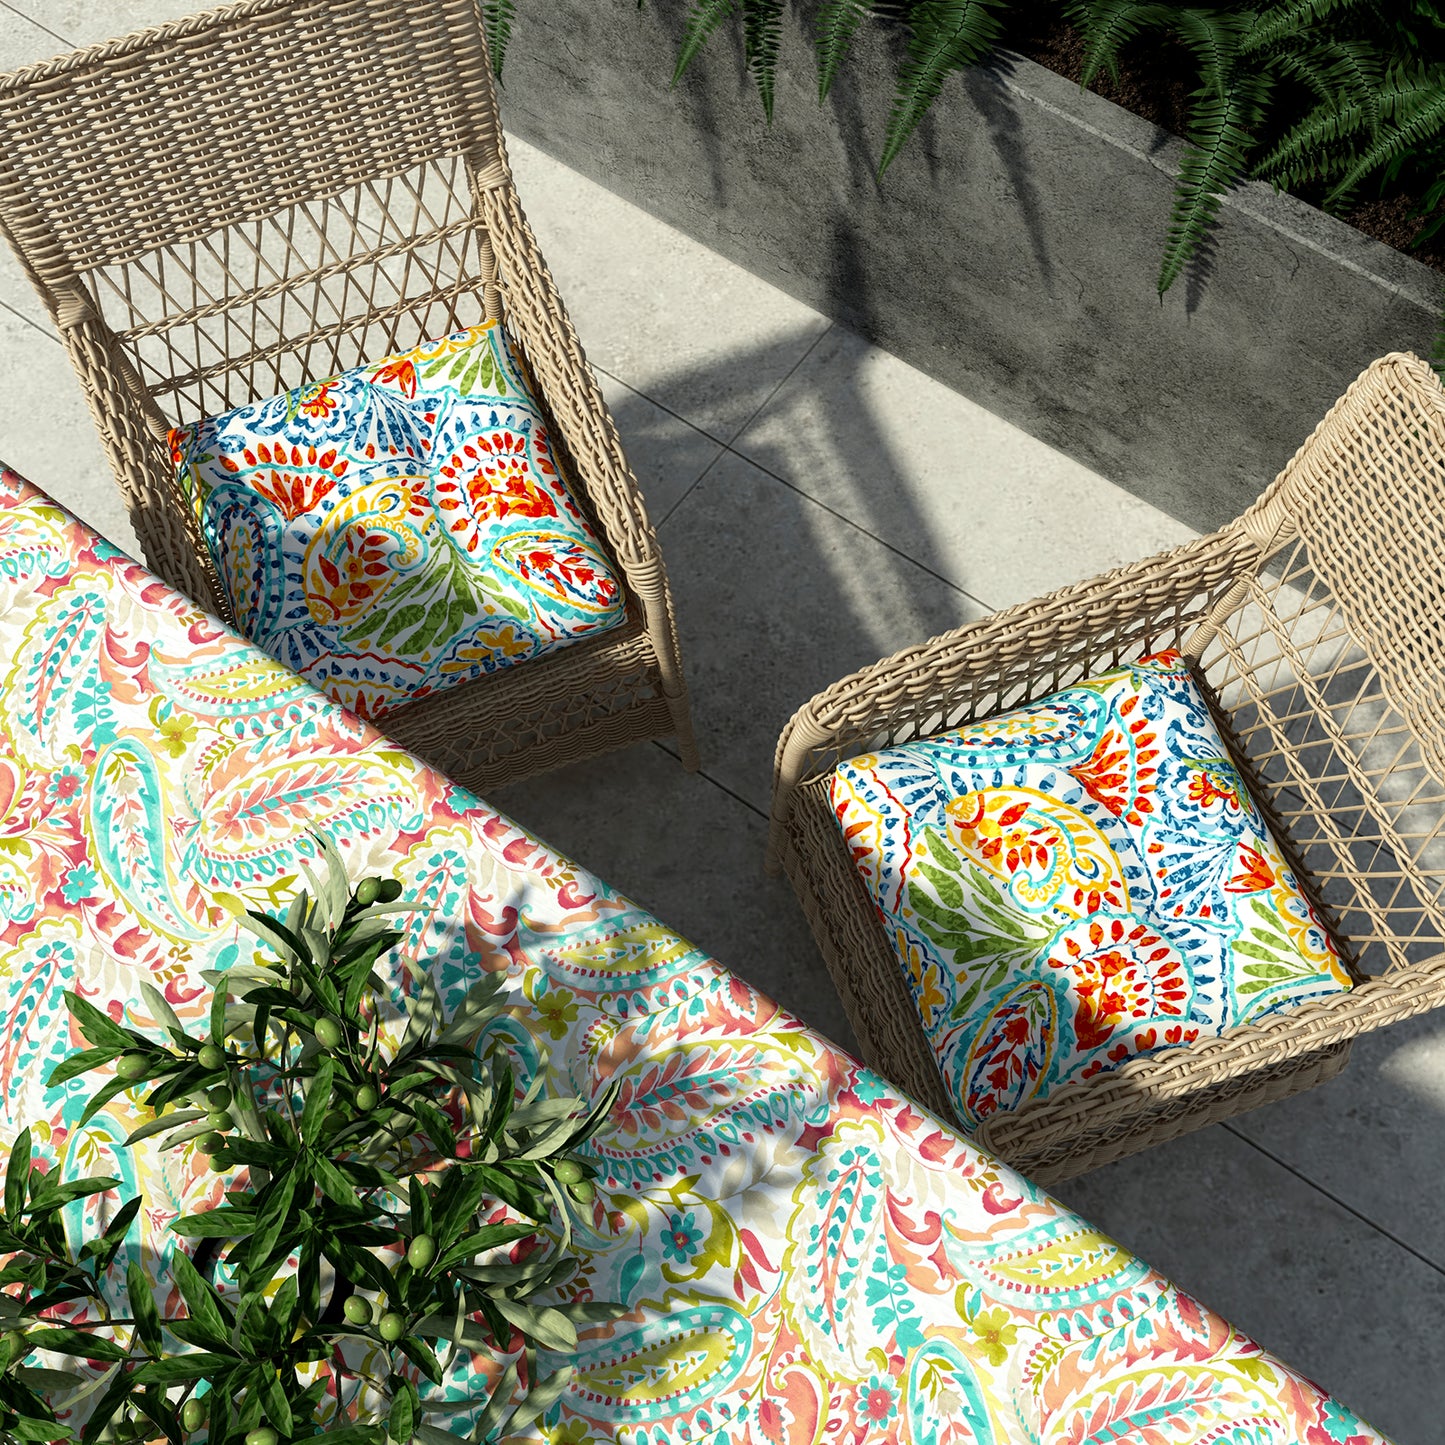 Melody Elephant Indoor/Outdoor Square Tufted Seat Cushions with Ties, Fade Resistant Patio Wicker Thick Chair Pads Pack of 2, 19 x 19 x 5 Inch, Paisley Multi